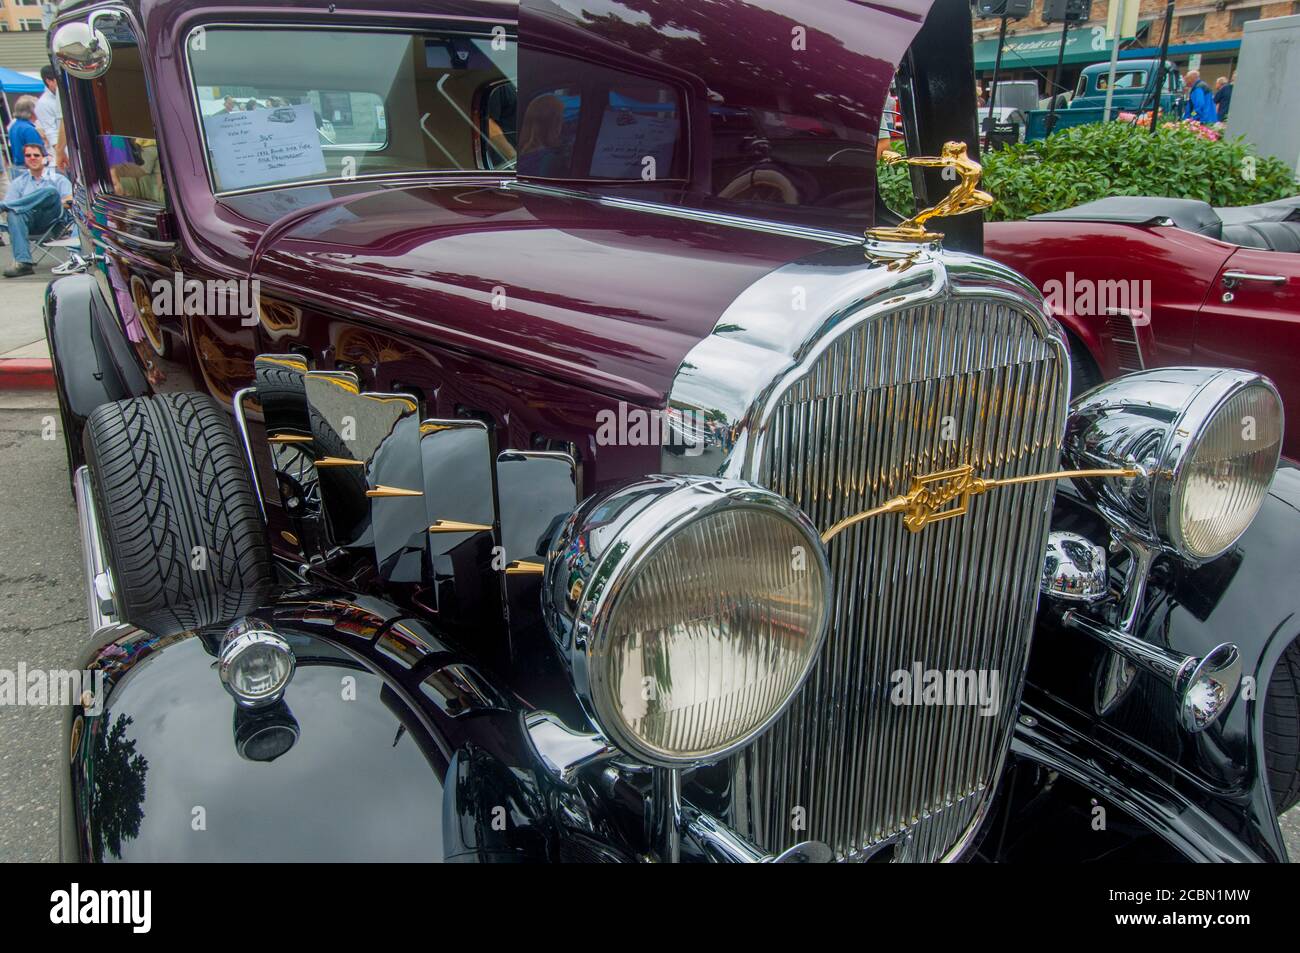 A 1932 Buick at the Classic Car Show in Kirkland, Washington State, United States. Stock Photo